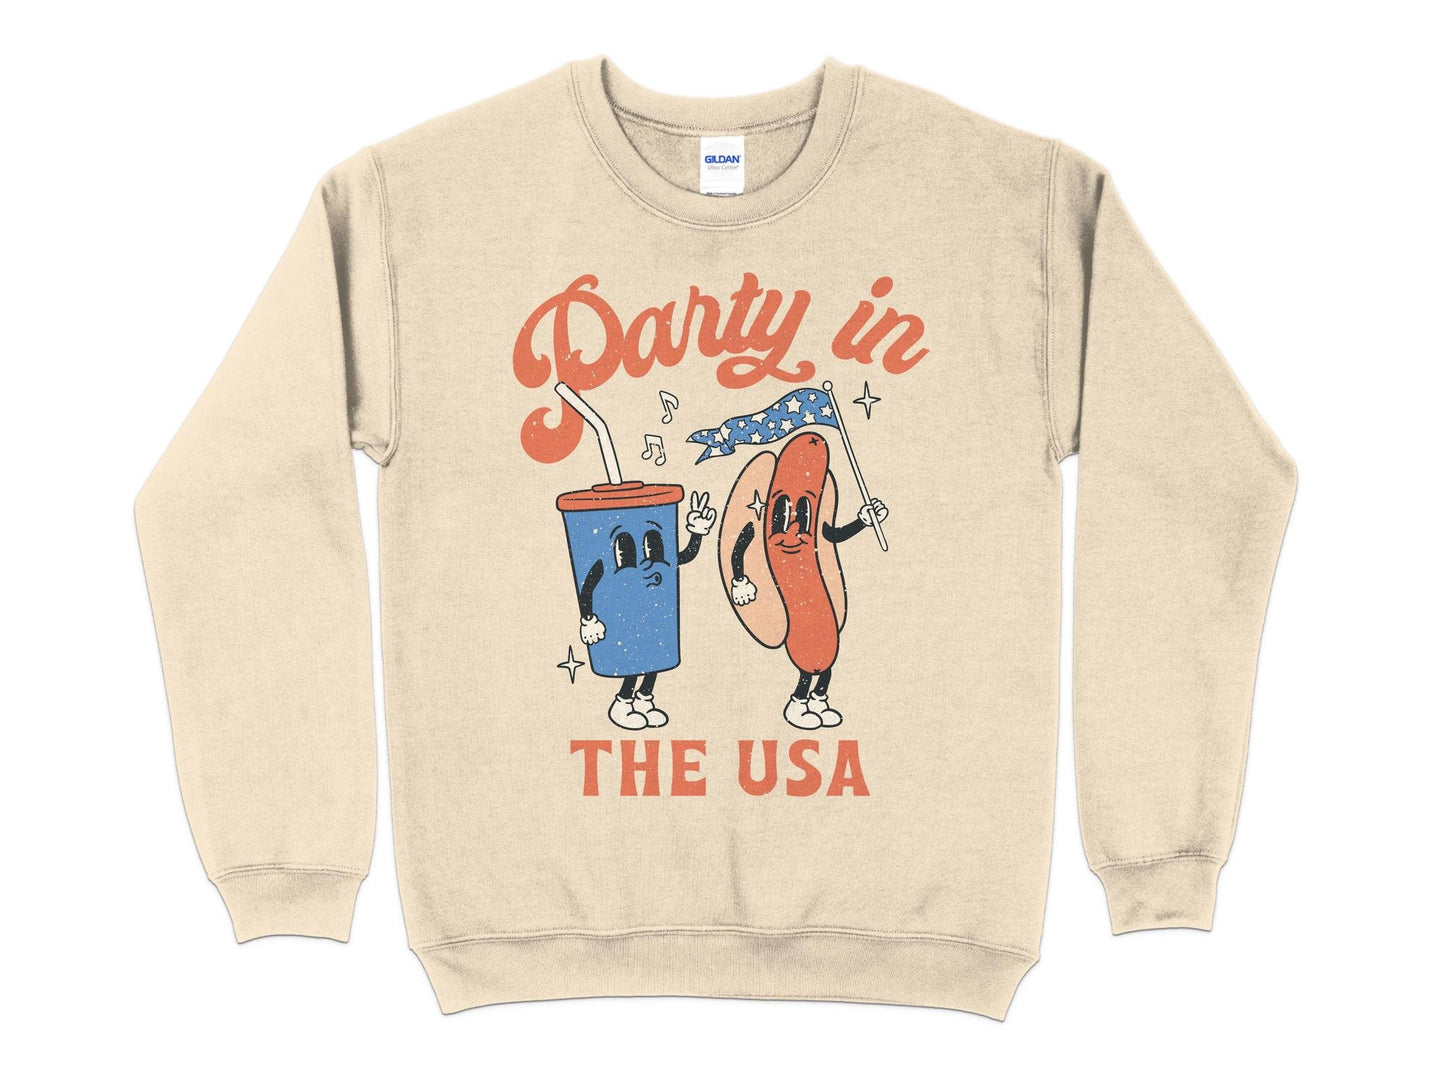 Party in the USA Sweatshirt, Fourth Of July Shirt, 4th Of July Tee, American Shirt, Patriotic Toddler Shirt, American Flag Shirt, Hot Dog Shirt